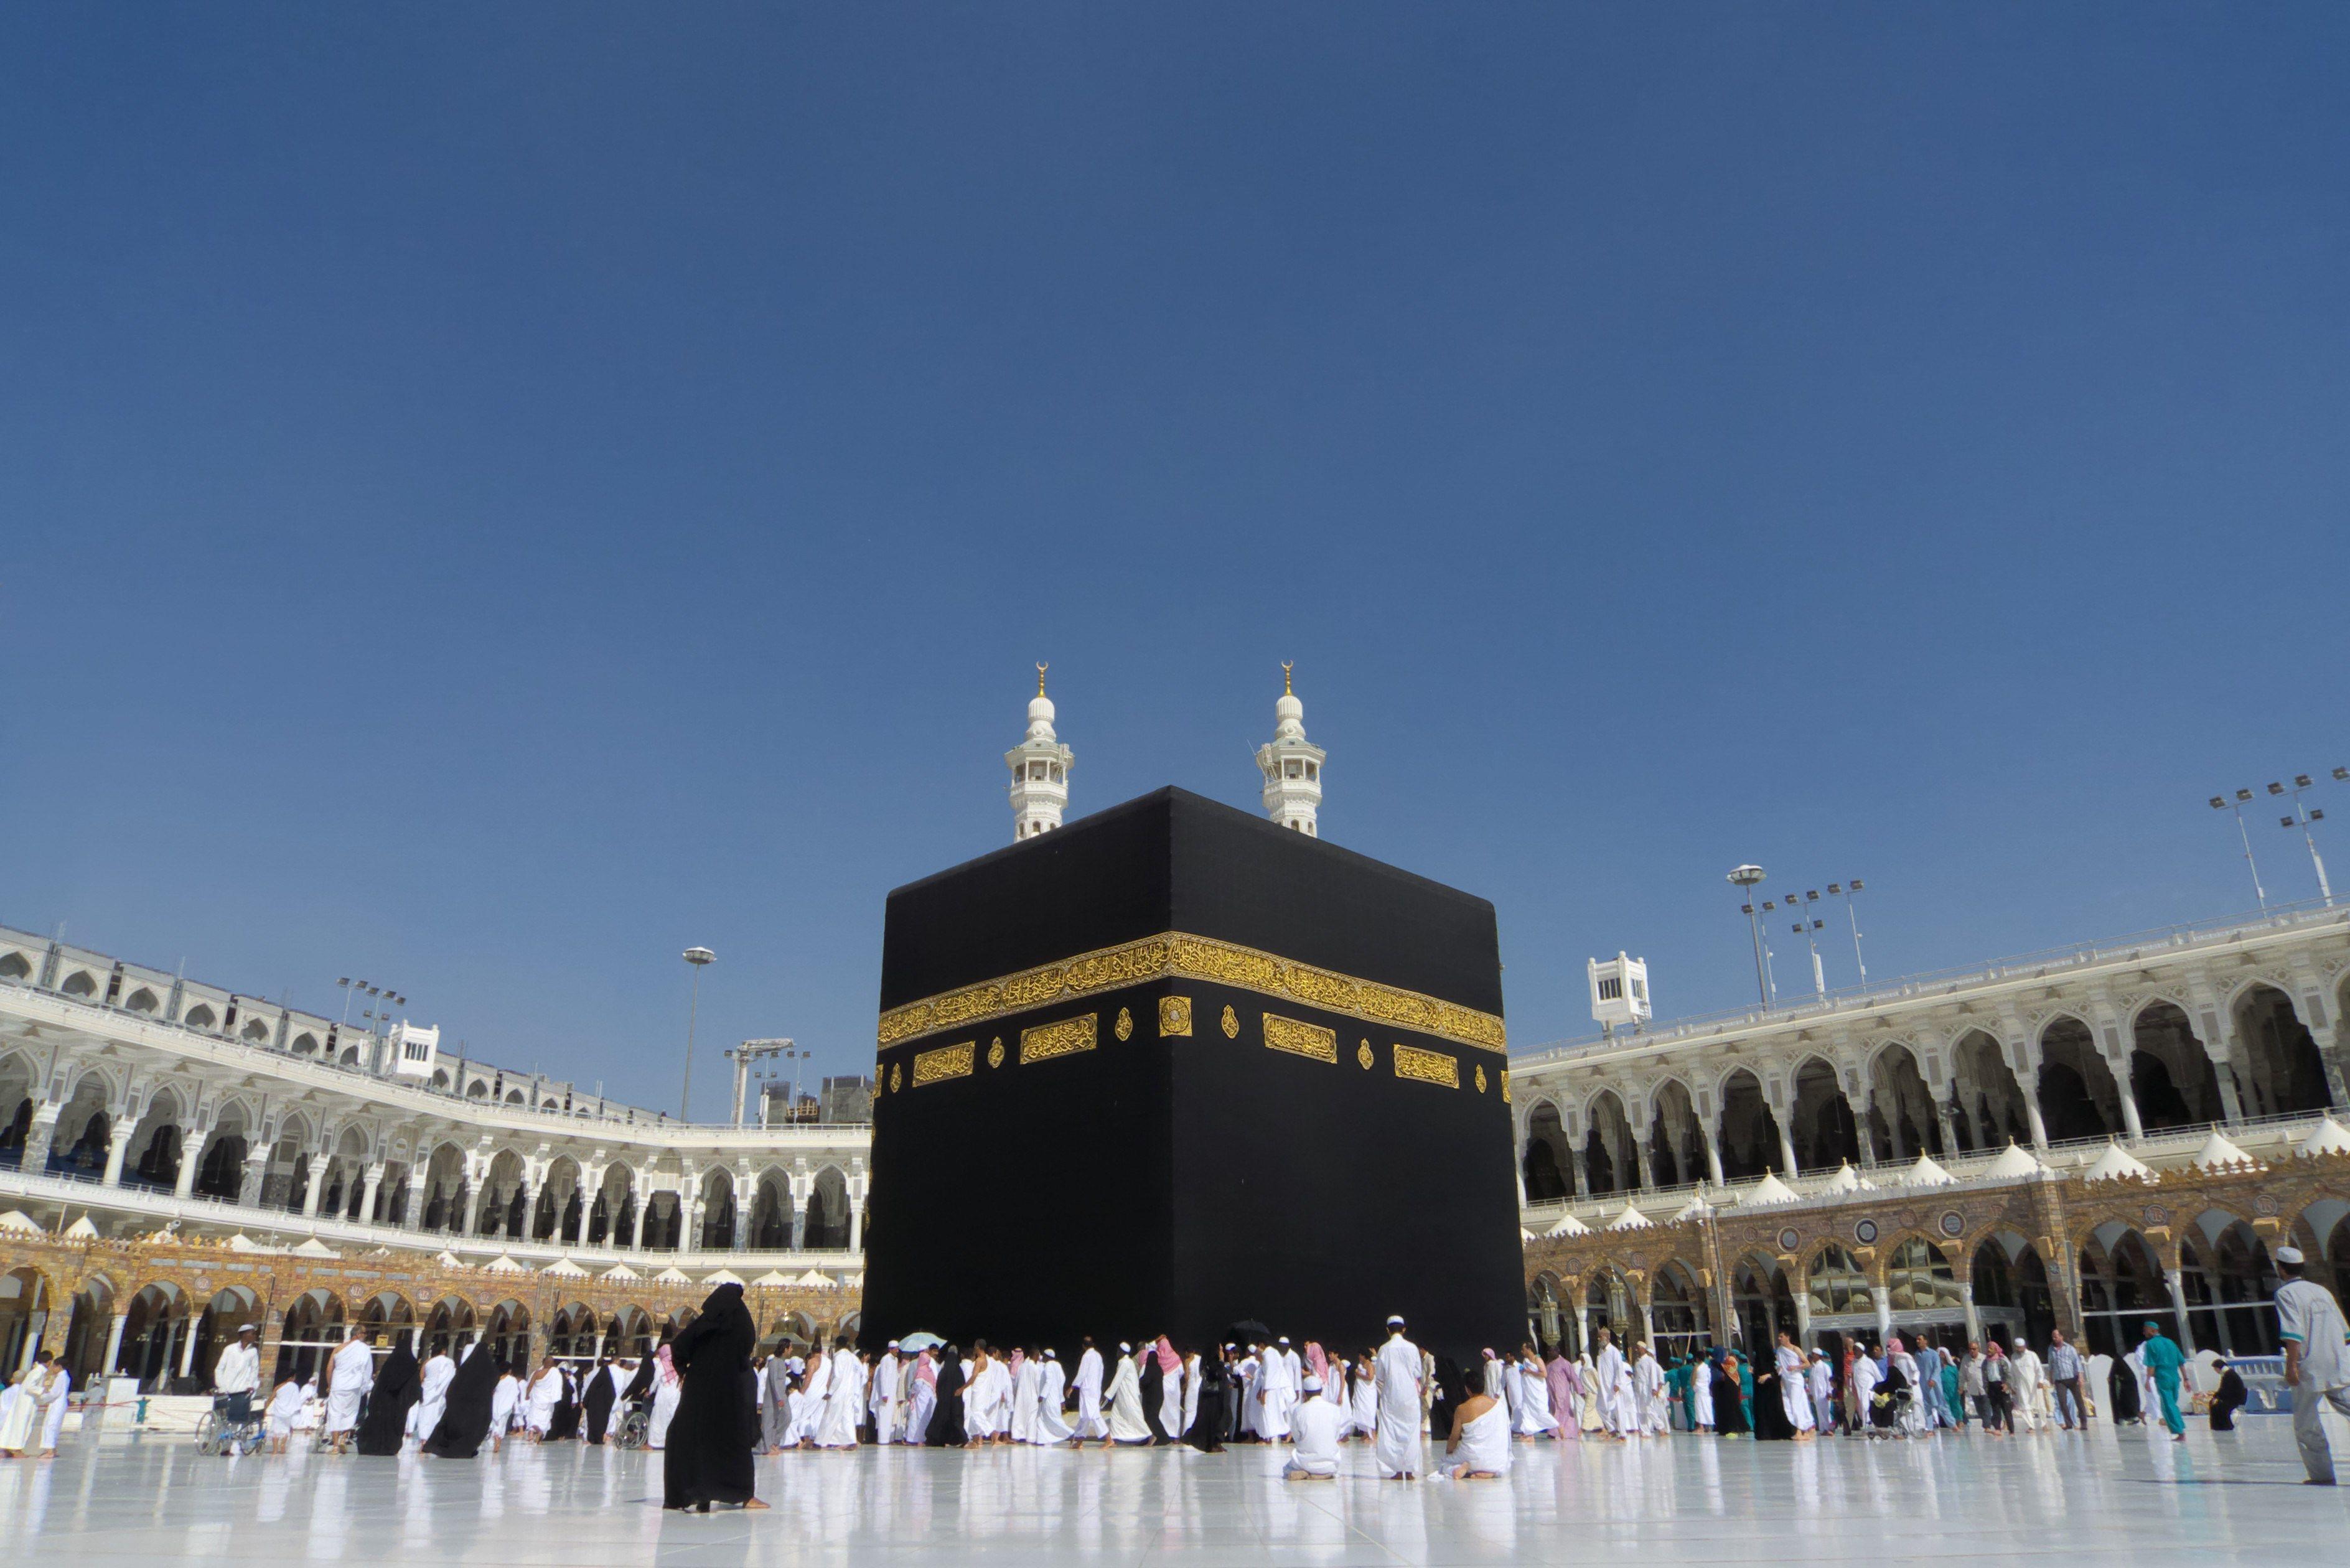 Kaaba Desktop : 500 Mecca Kaaba Pictures Hd Download Free Images On Unsplash - Find over 100+ of the best free mecca kaaba images.